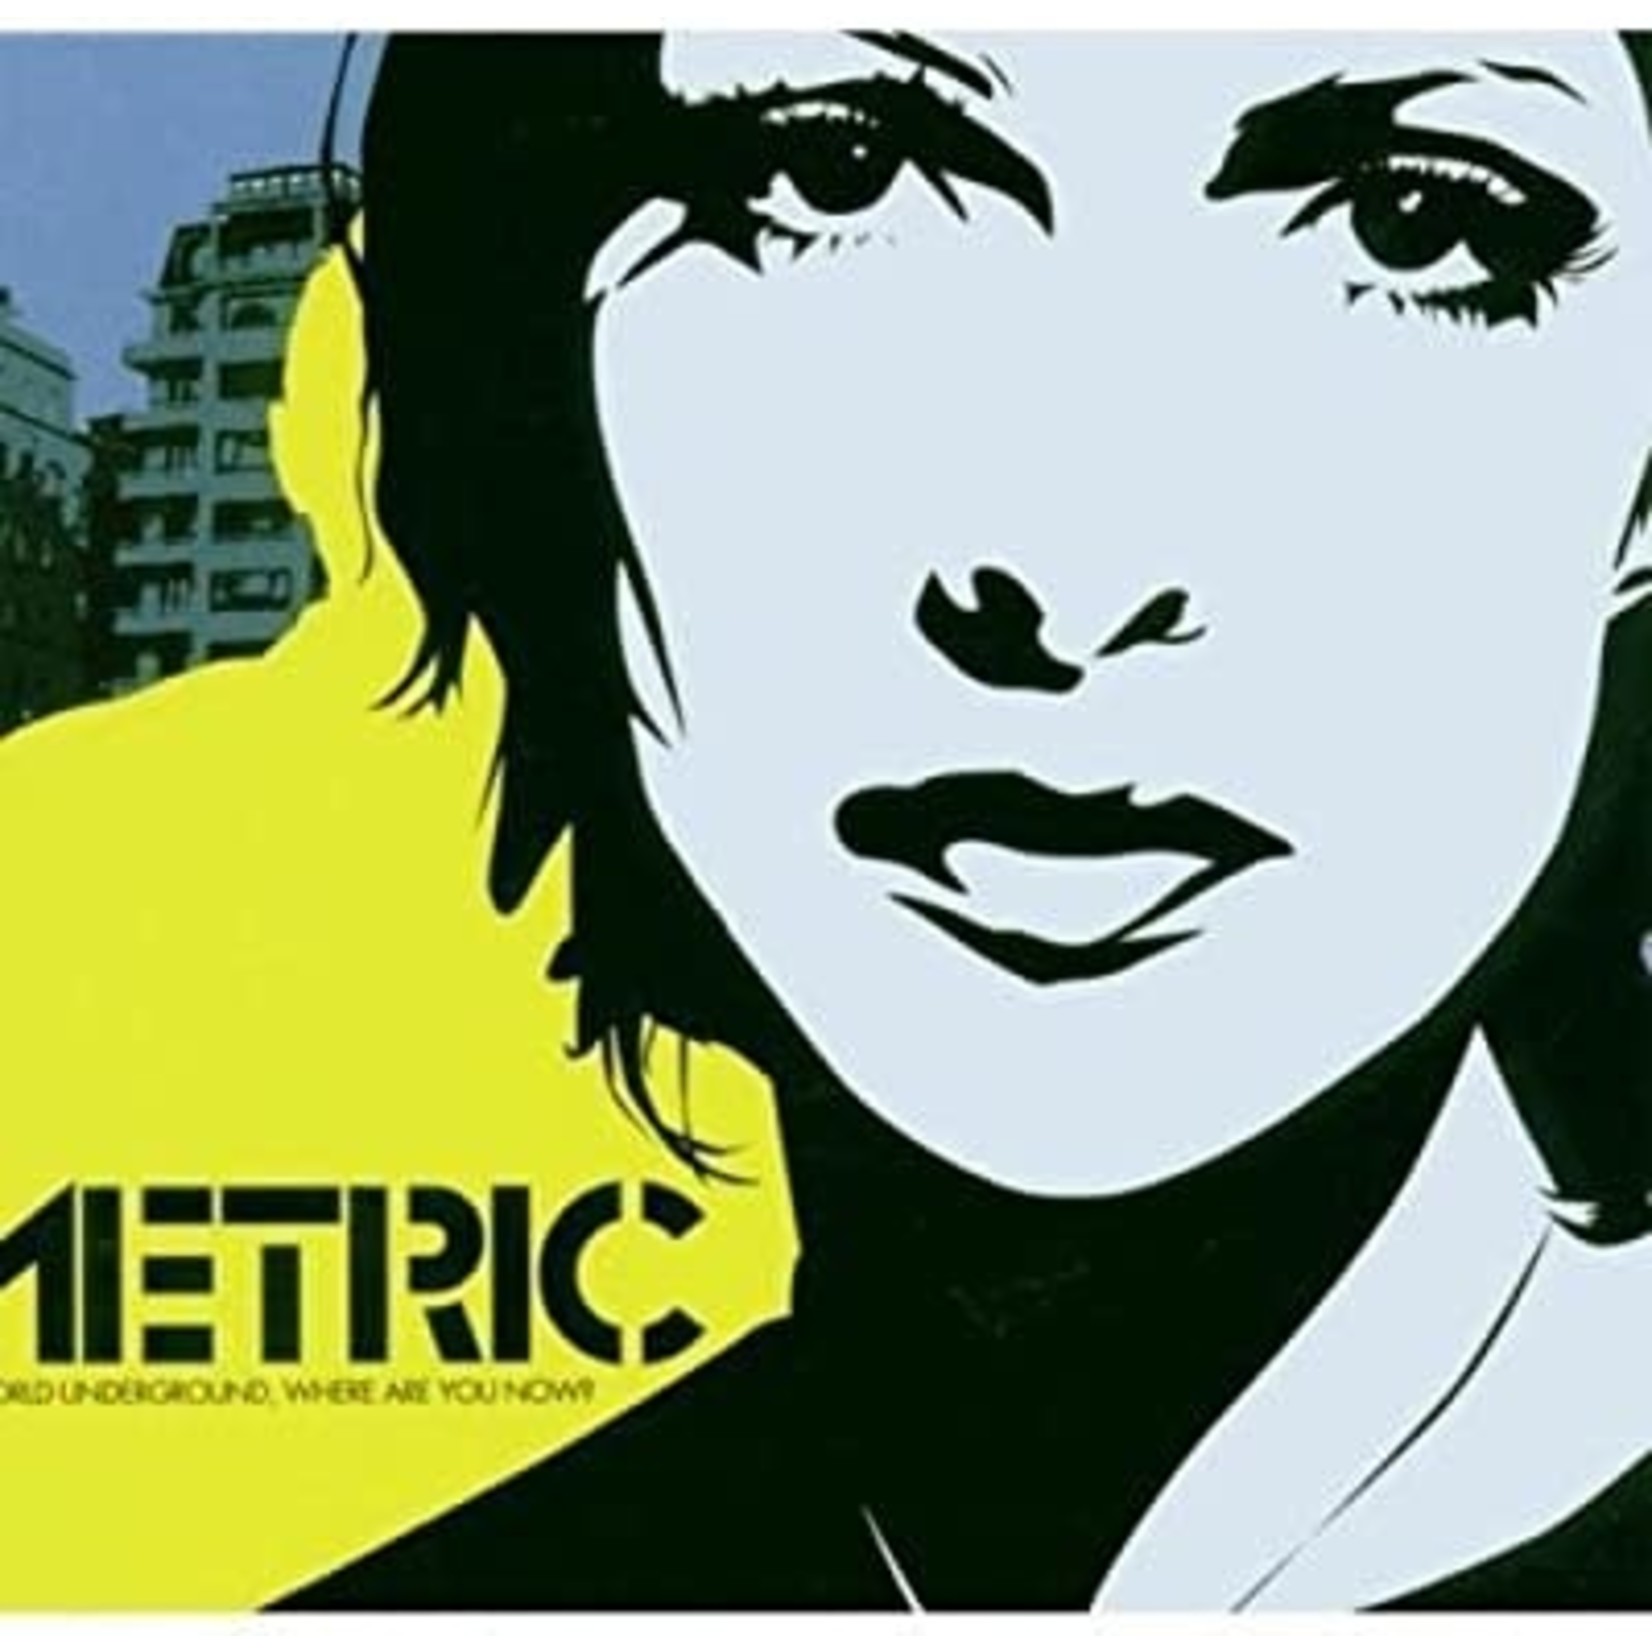 Vinyl Metric - Old World Underground, Where Are You Now?